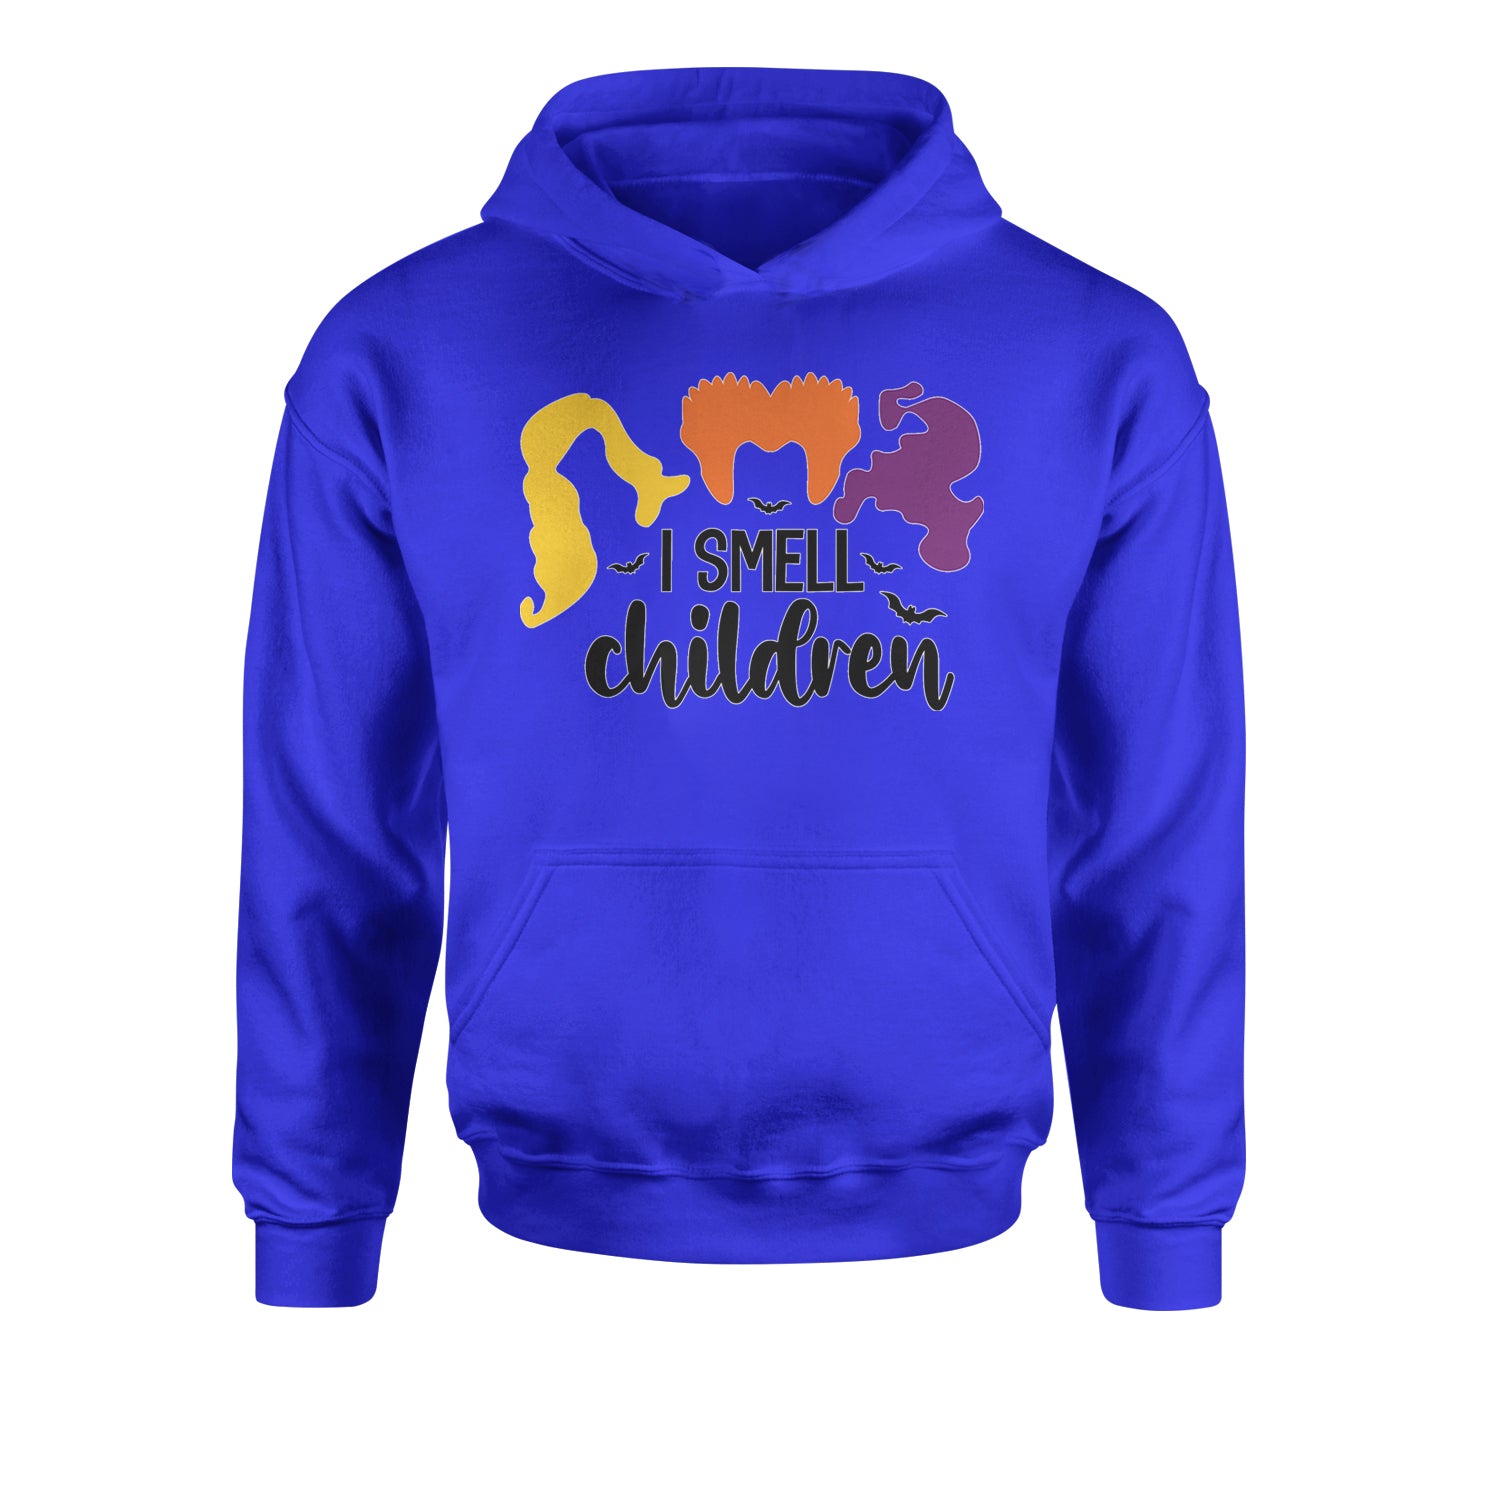 I Smell Children Hocus Pocus Youth-Sized Hoodie descendants, enchanted, eve, hallows, hocus, or, pocus, sanderson, sisters, treat, trick, witches by Expression Tees